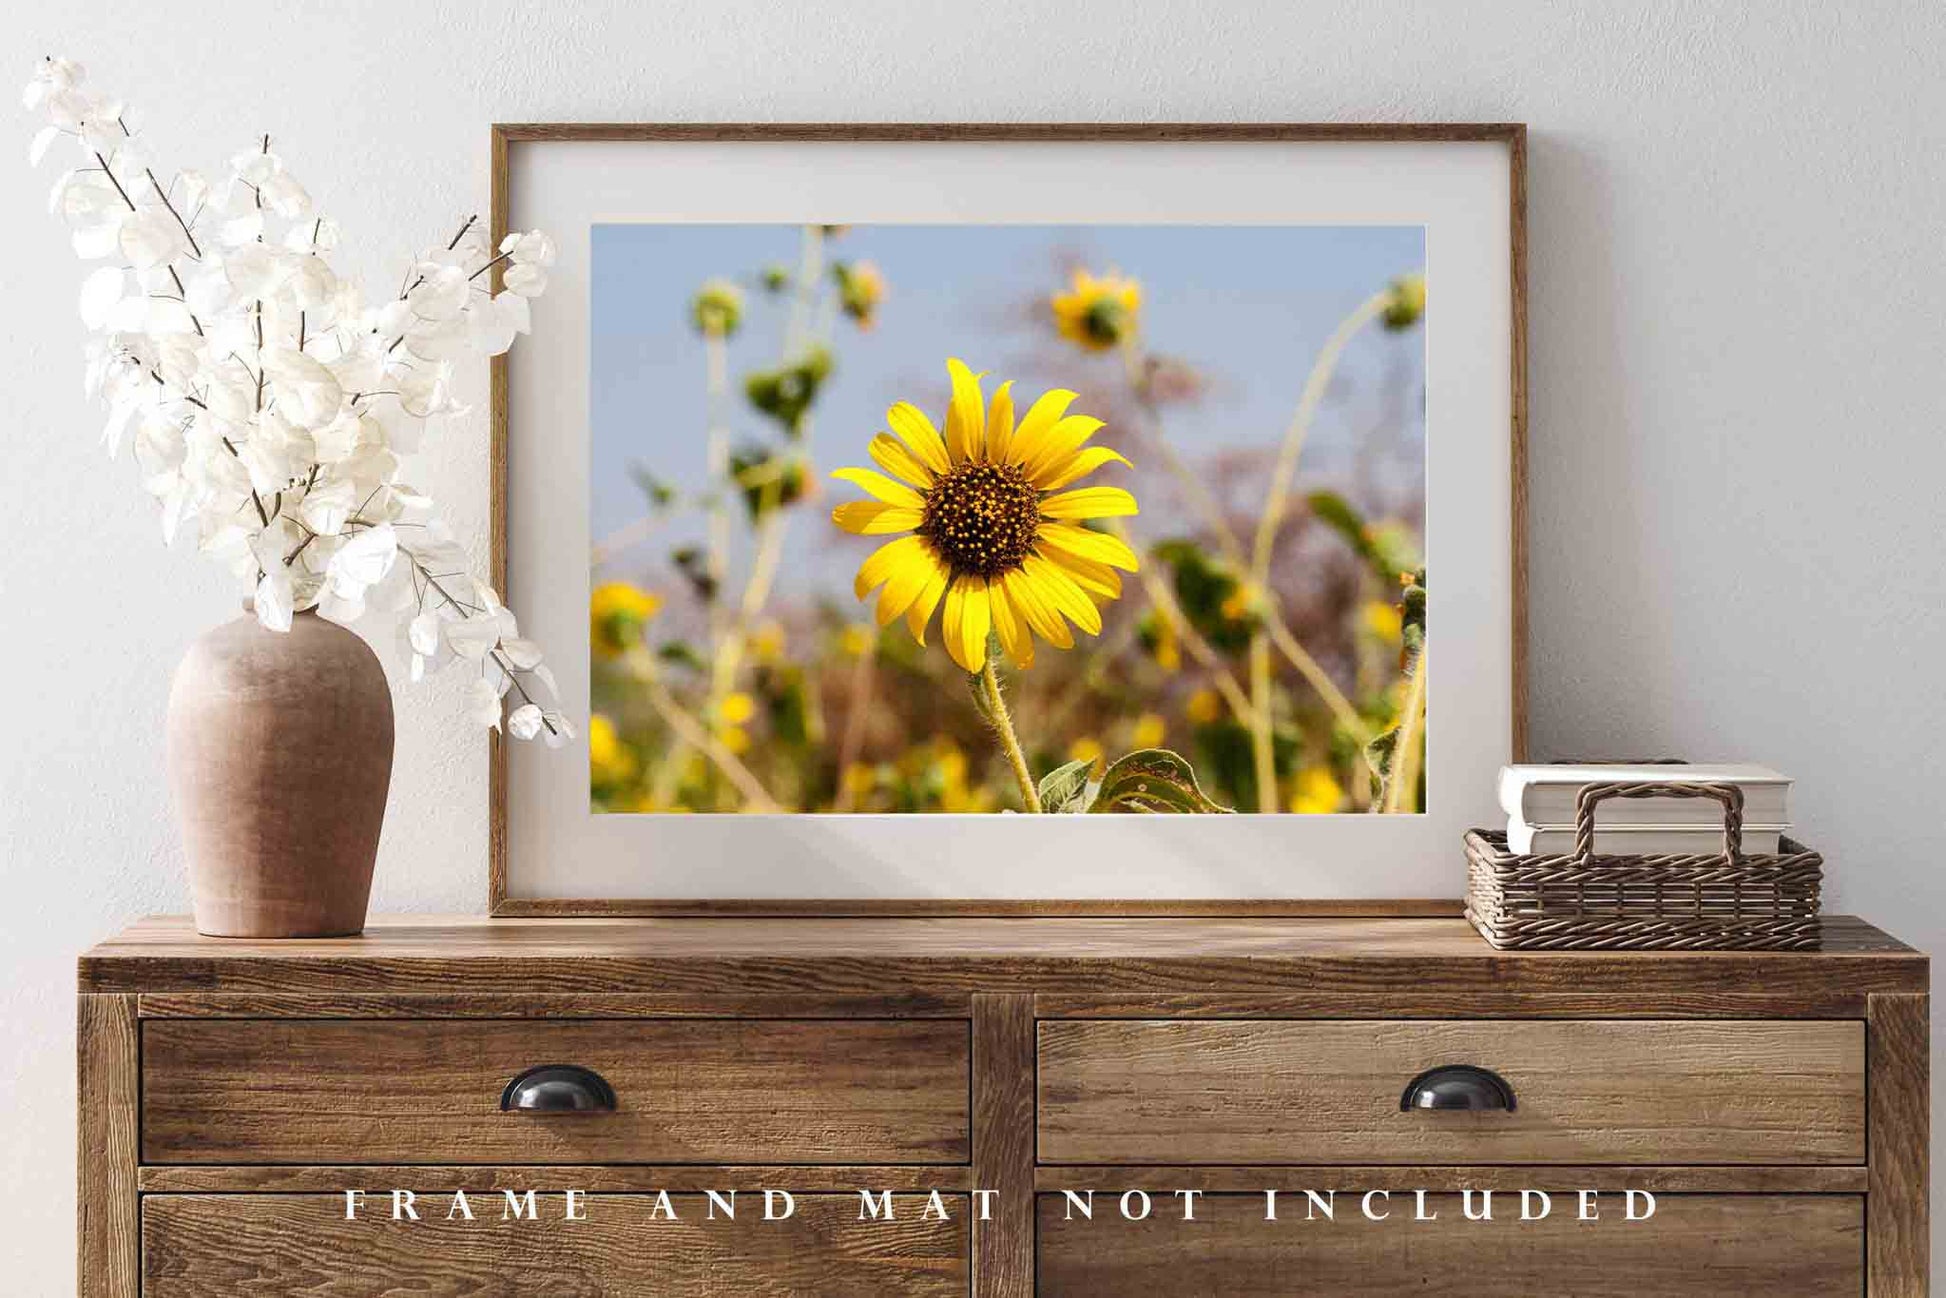 Sunflower Picture - Nature Photography Print of Yellow Wildflower on S –  Southern Plains Photography